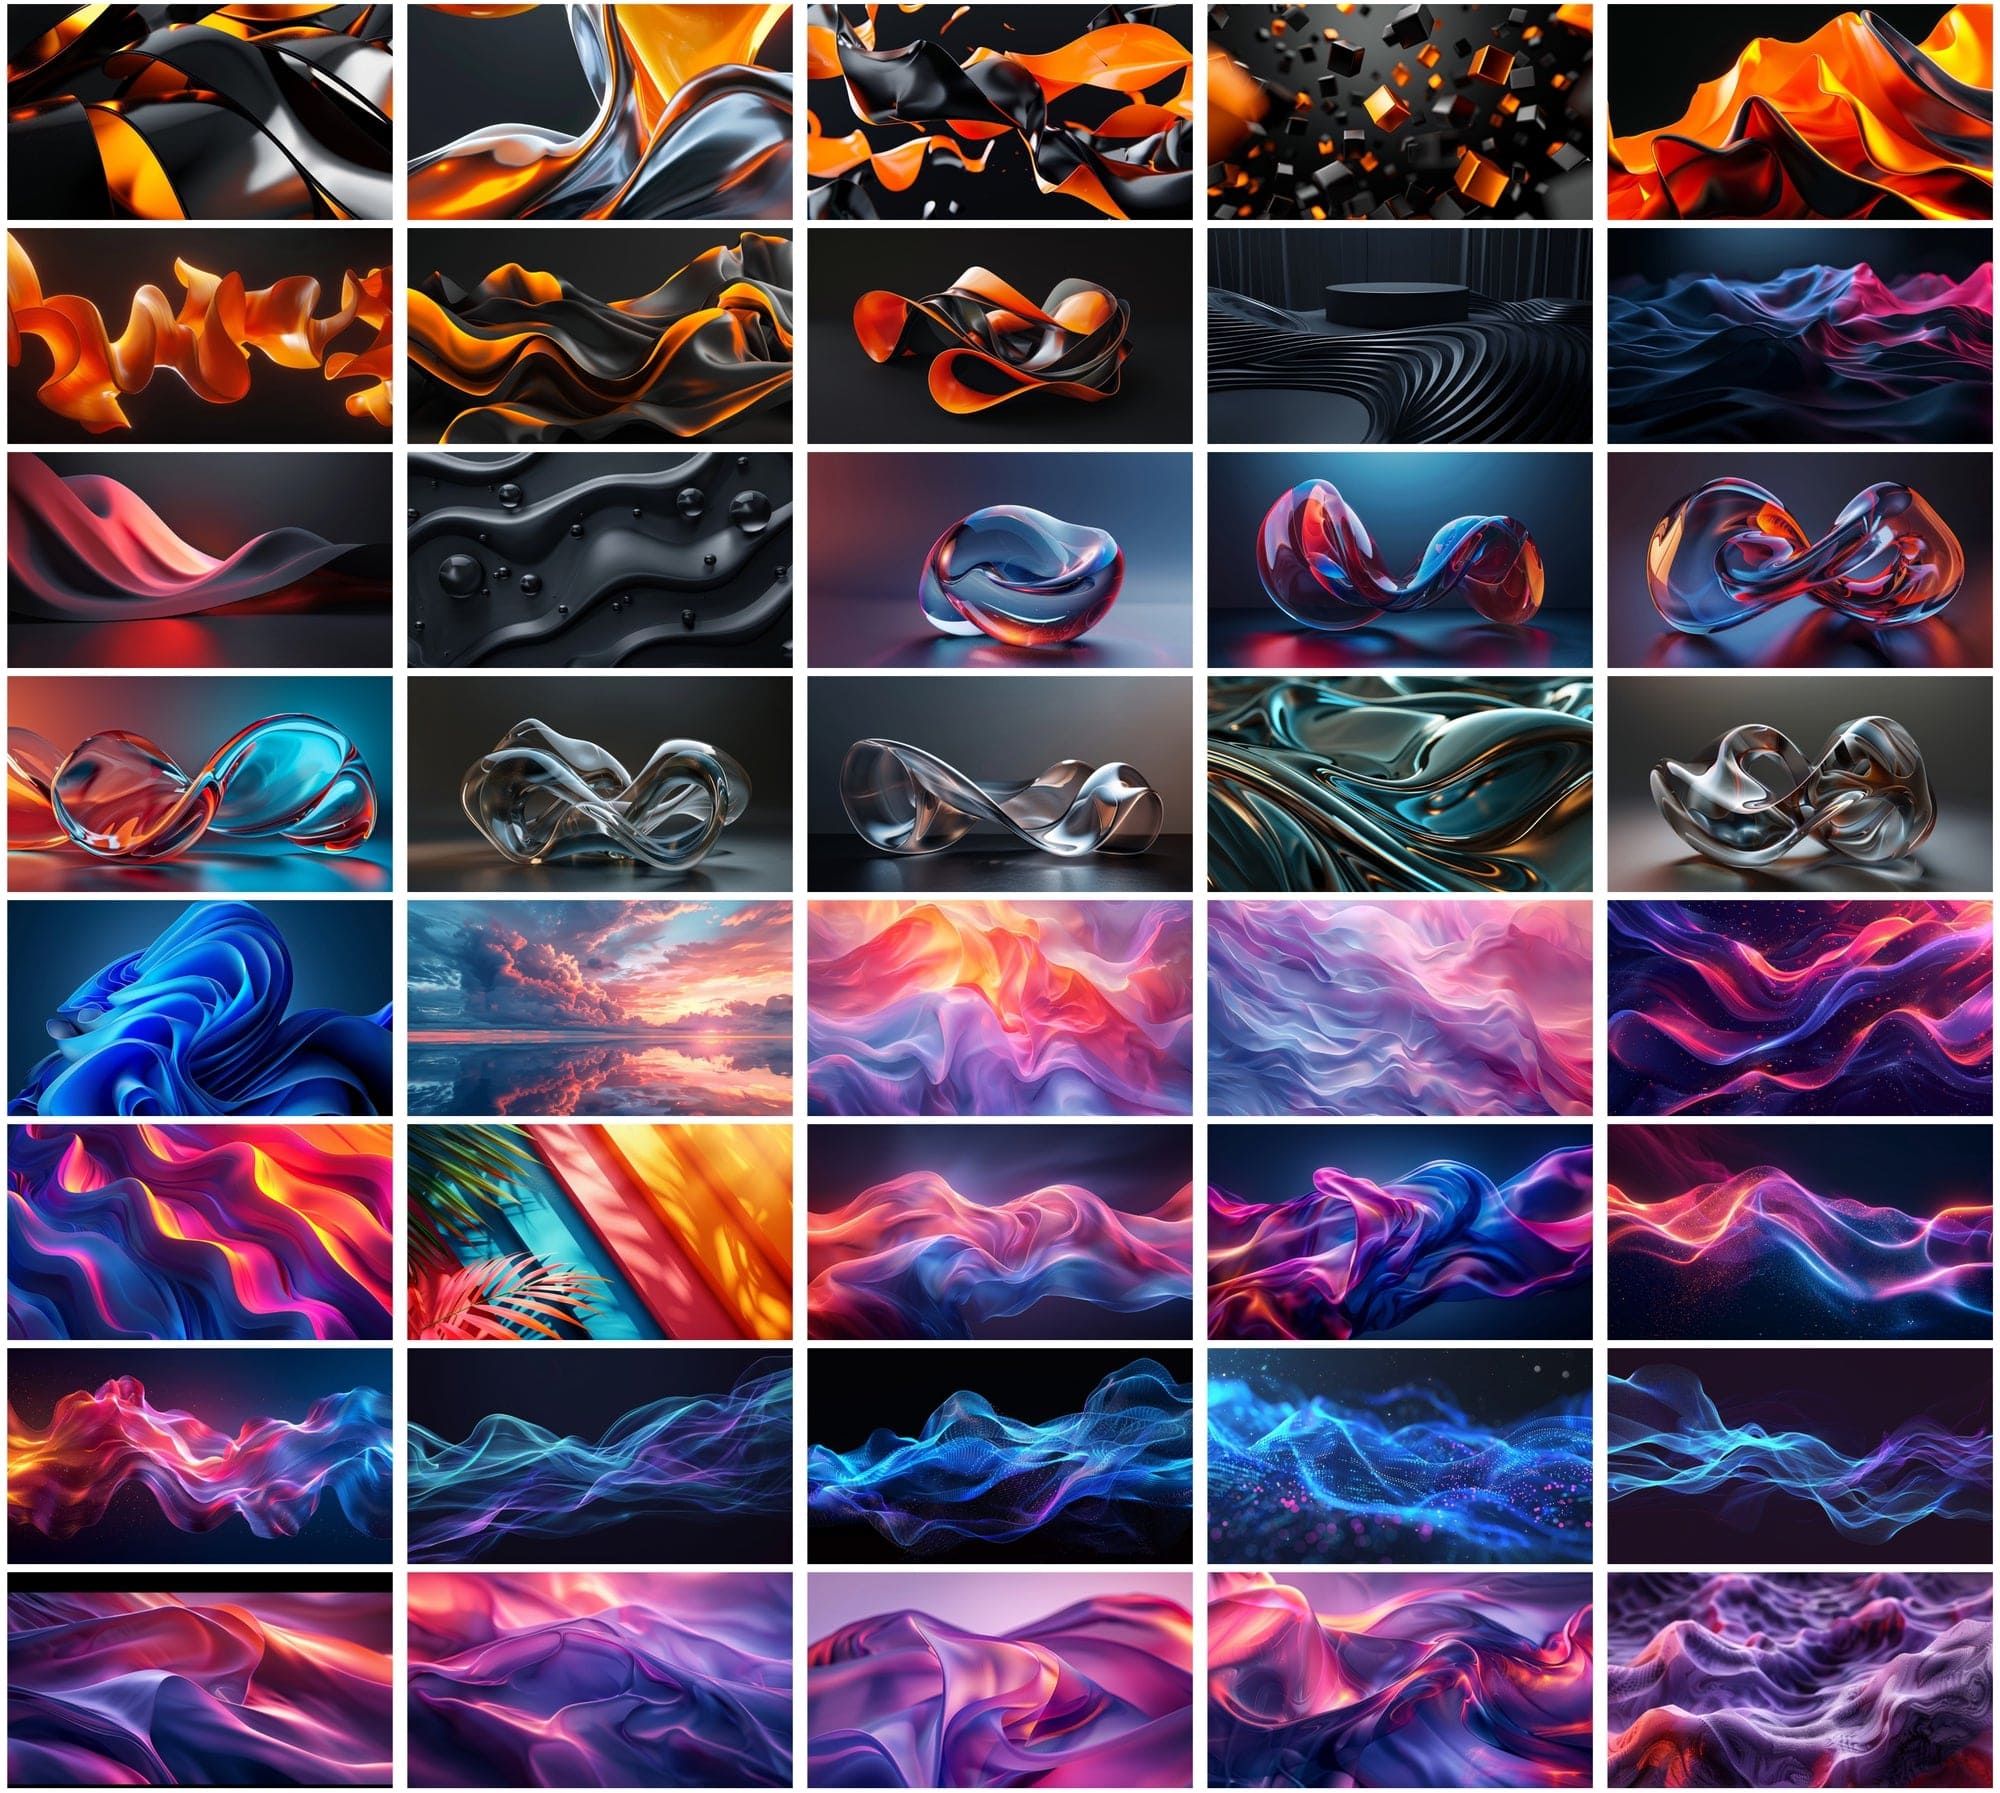 Ultimate Collection of 500 Hero Images & Wallpapers - Neon, Abstract, and Futuristic Designs Digital Download Sumobundle